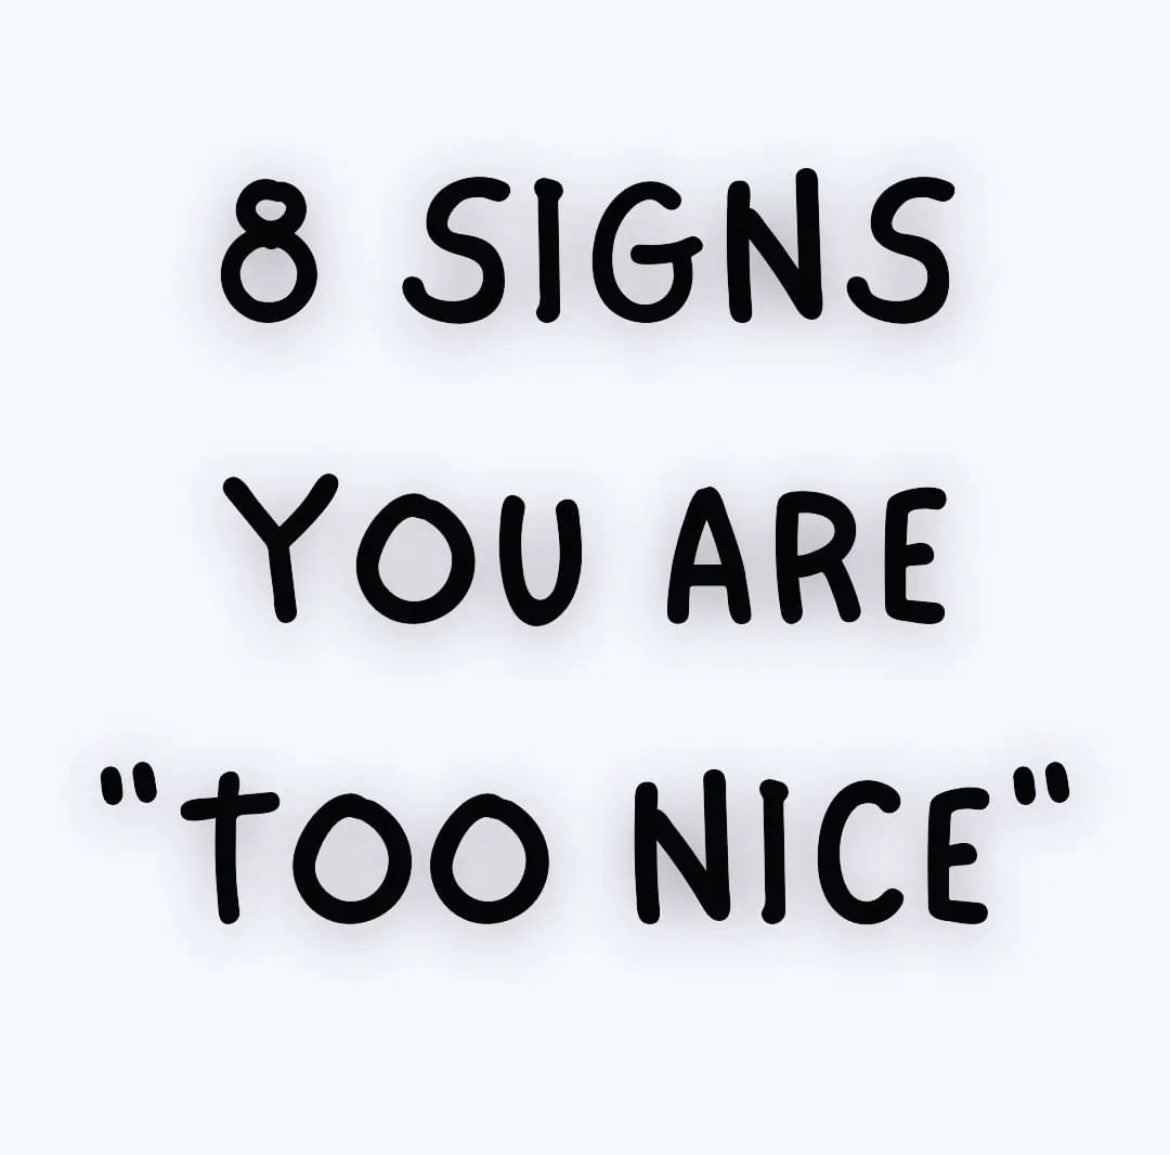 8 SIGNS YOU ARE 'too NICE'